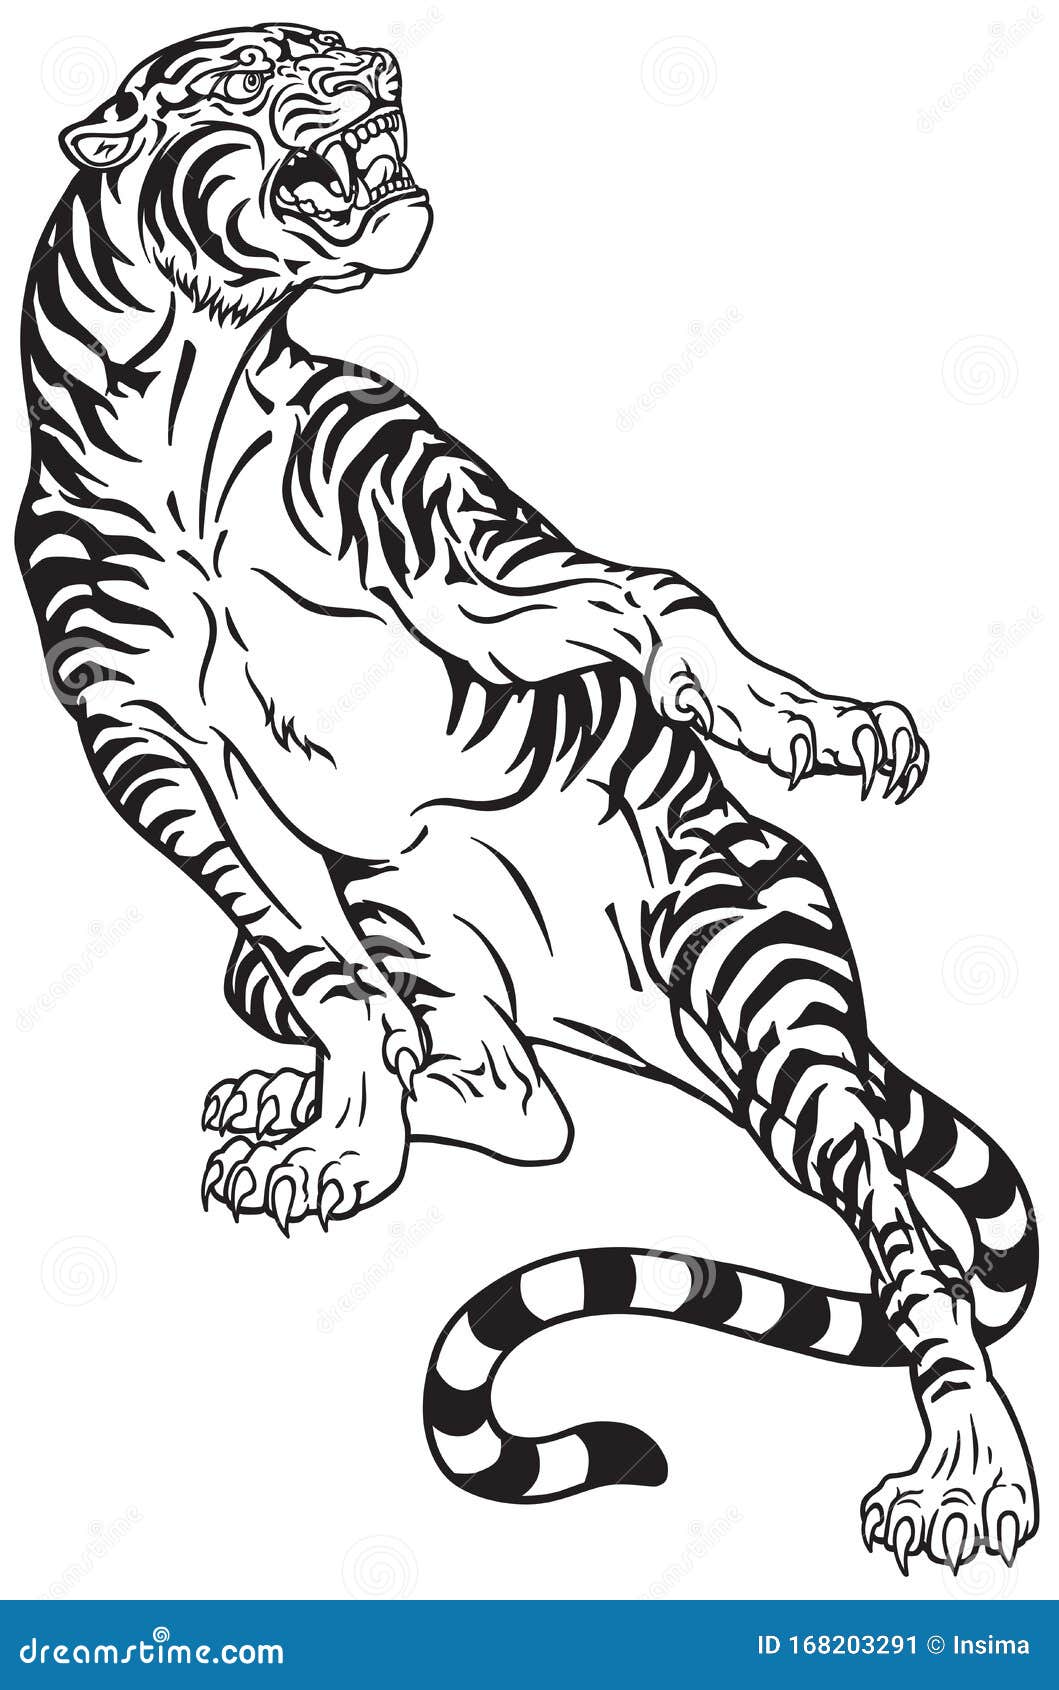 430 Drawing Of The Black And White Tiger Face Illustrations RoyaltyFree  Vector Graphics  Clip Art  iStock